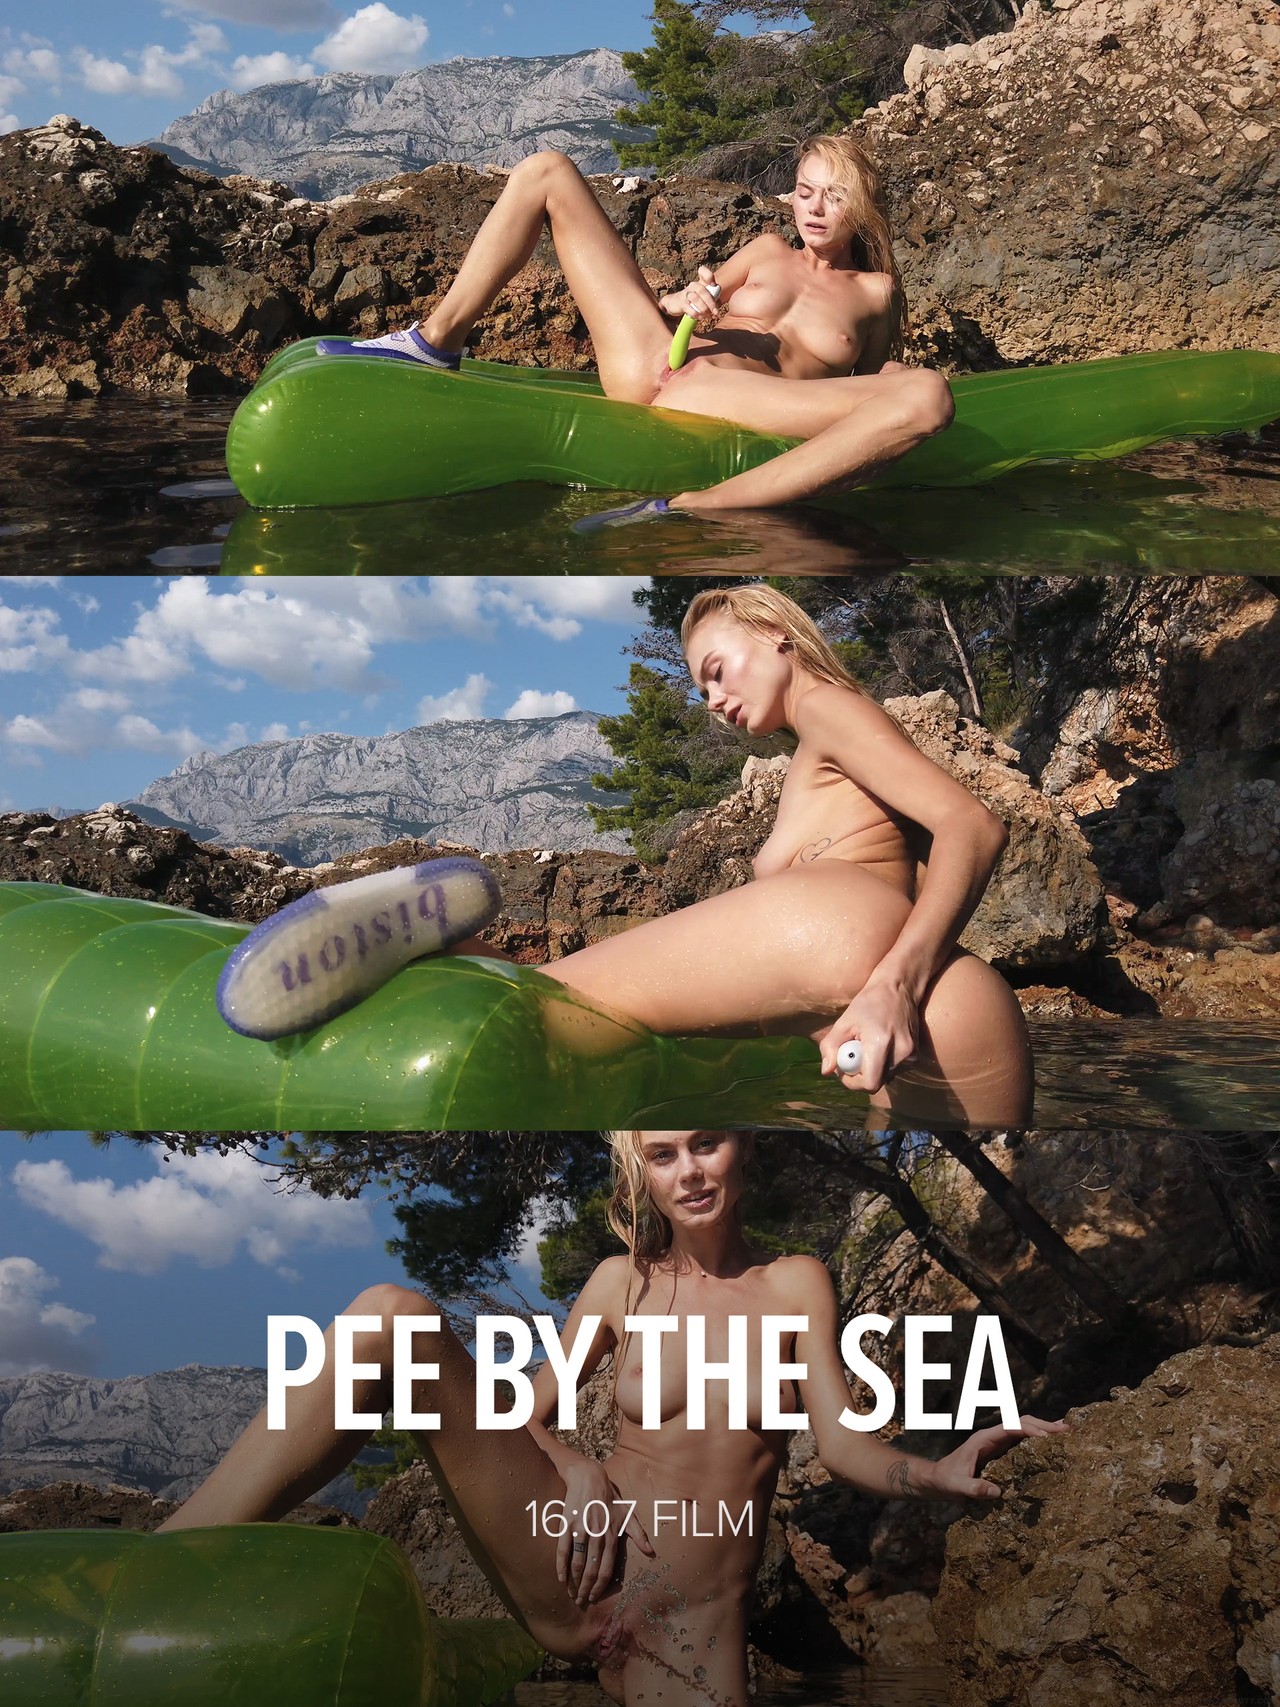 Nancy A: Pee By The See